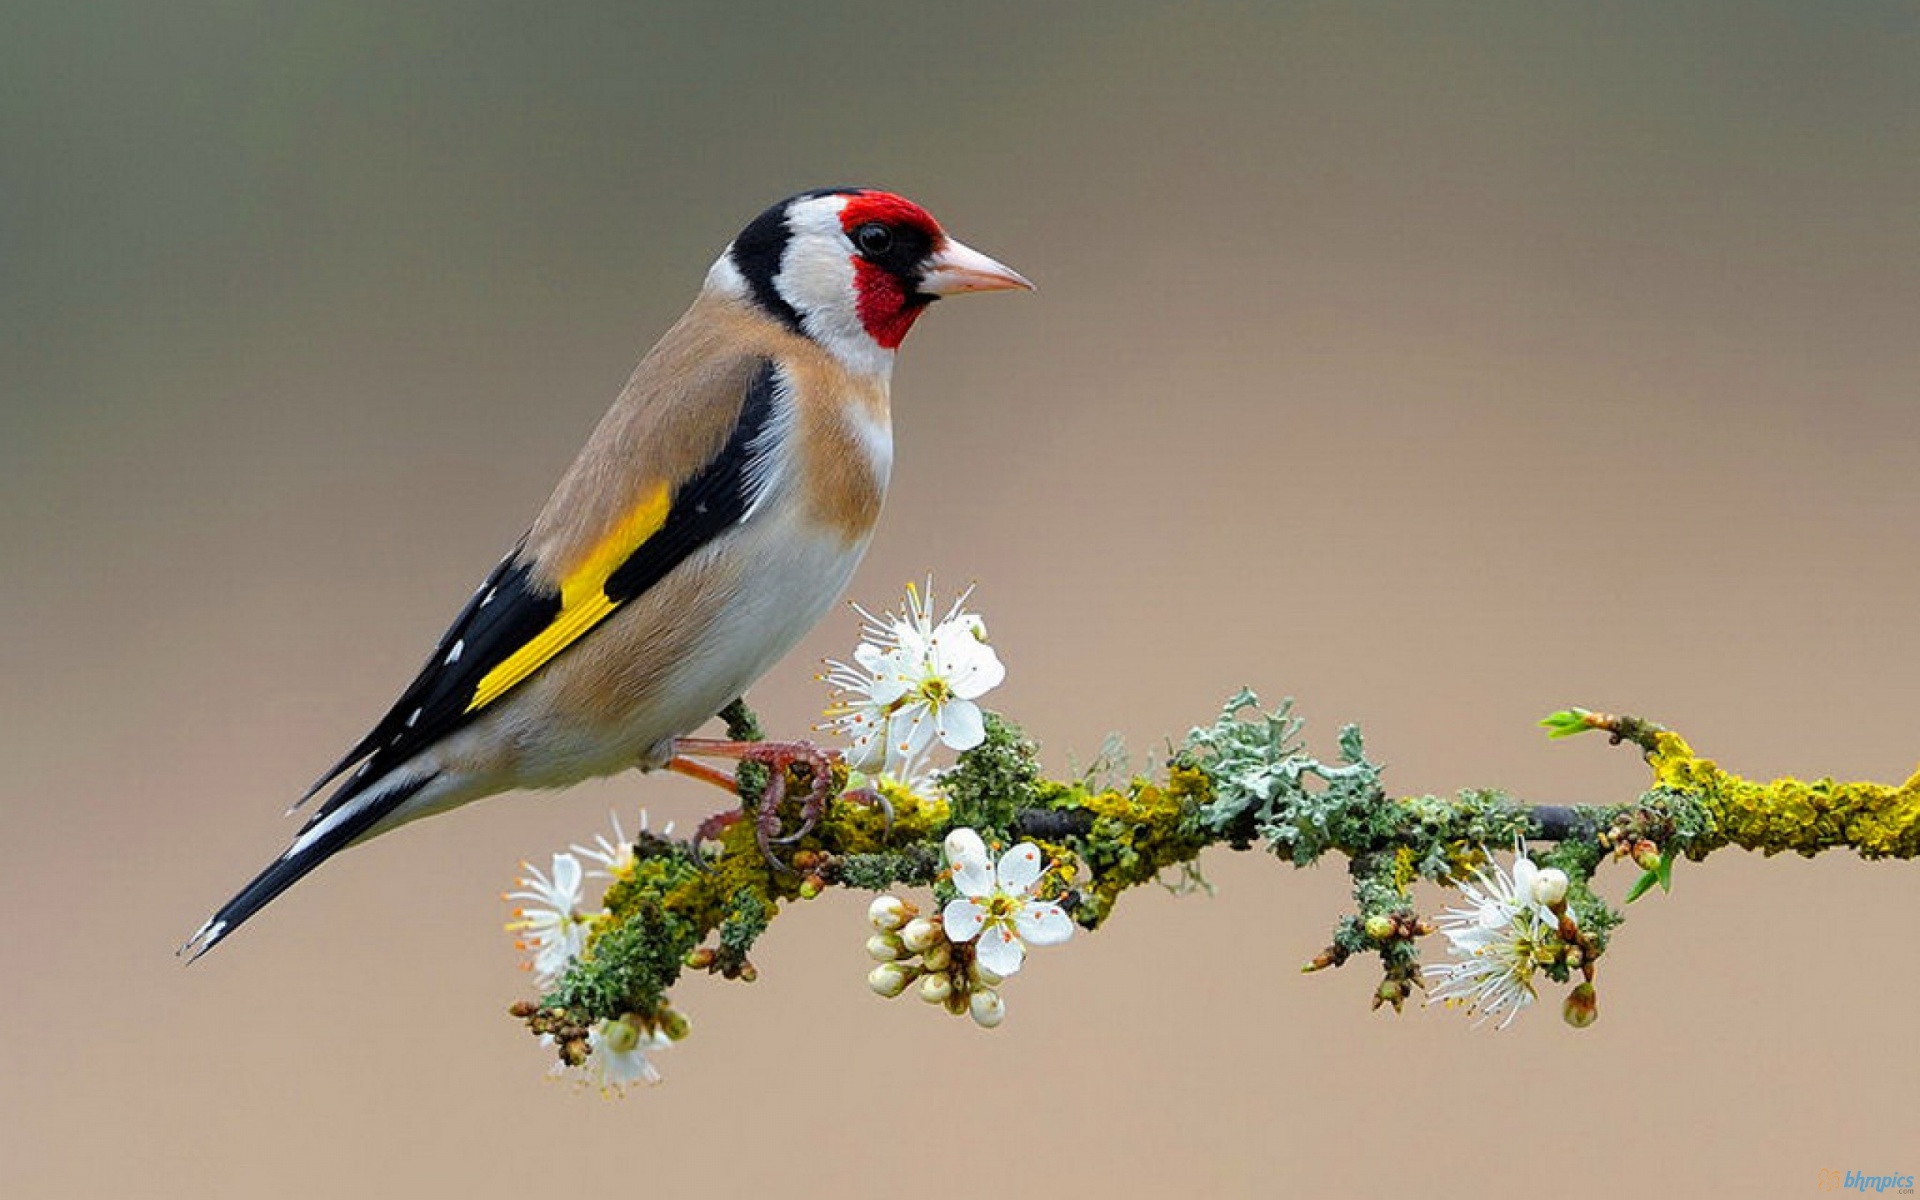 Colorful Birds Wallpaper: Hd Colorful Bird On Flowering Branch Wallpaper Download Free 1920x1200px